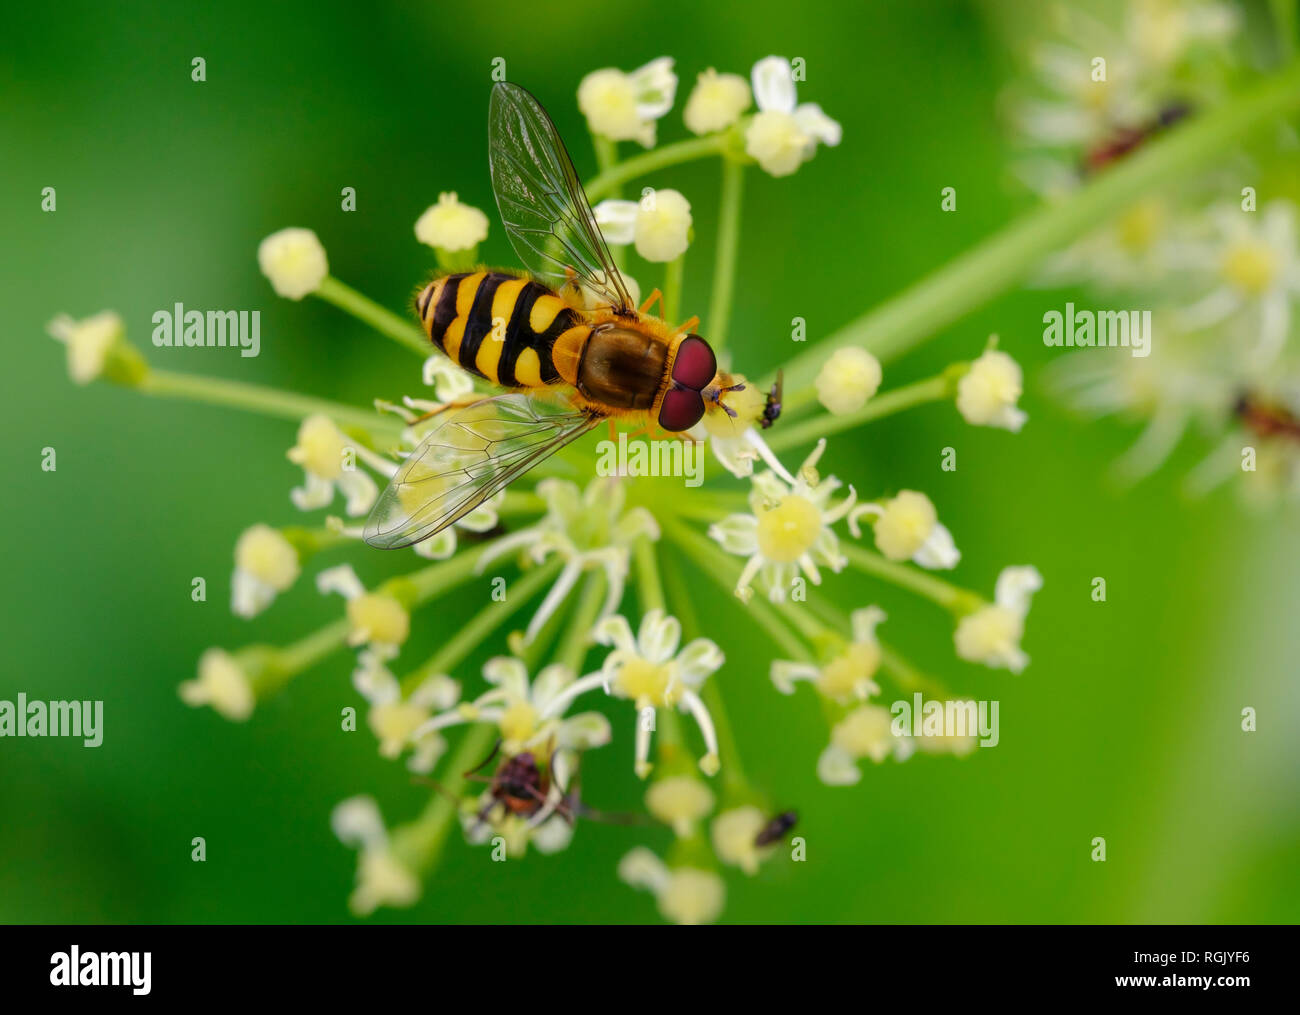 Albania, Common banded hoverfly, Syrphus ribesii, on flower Stock Photo